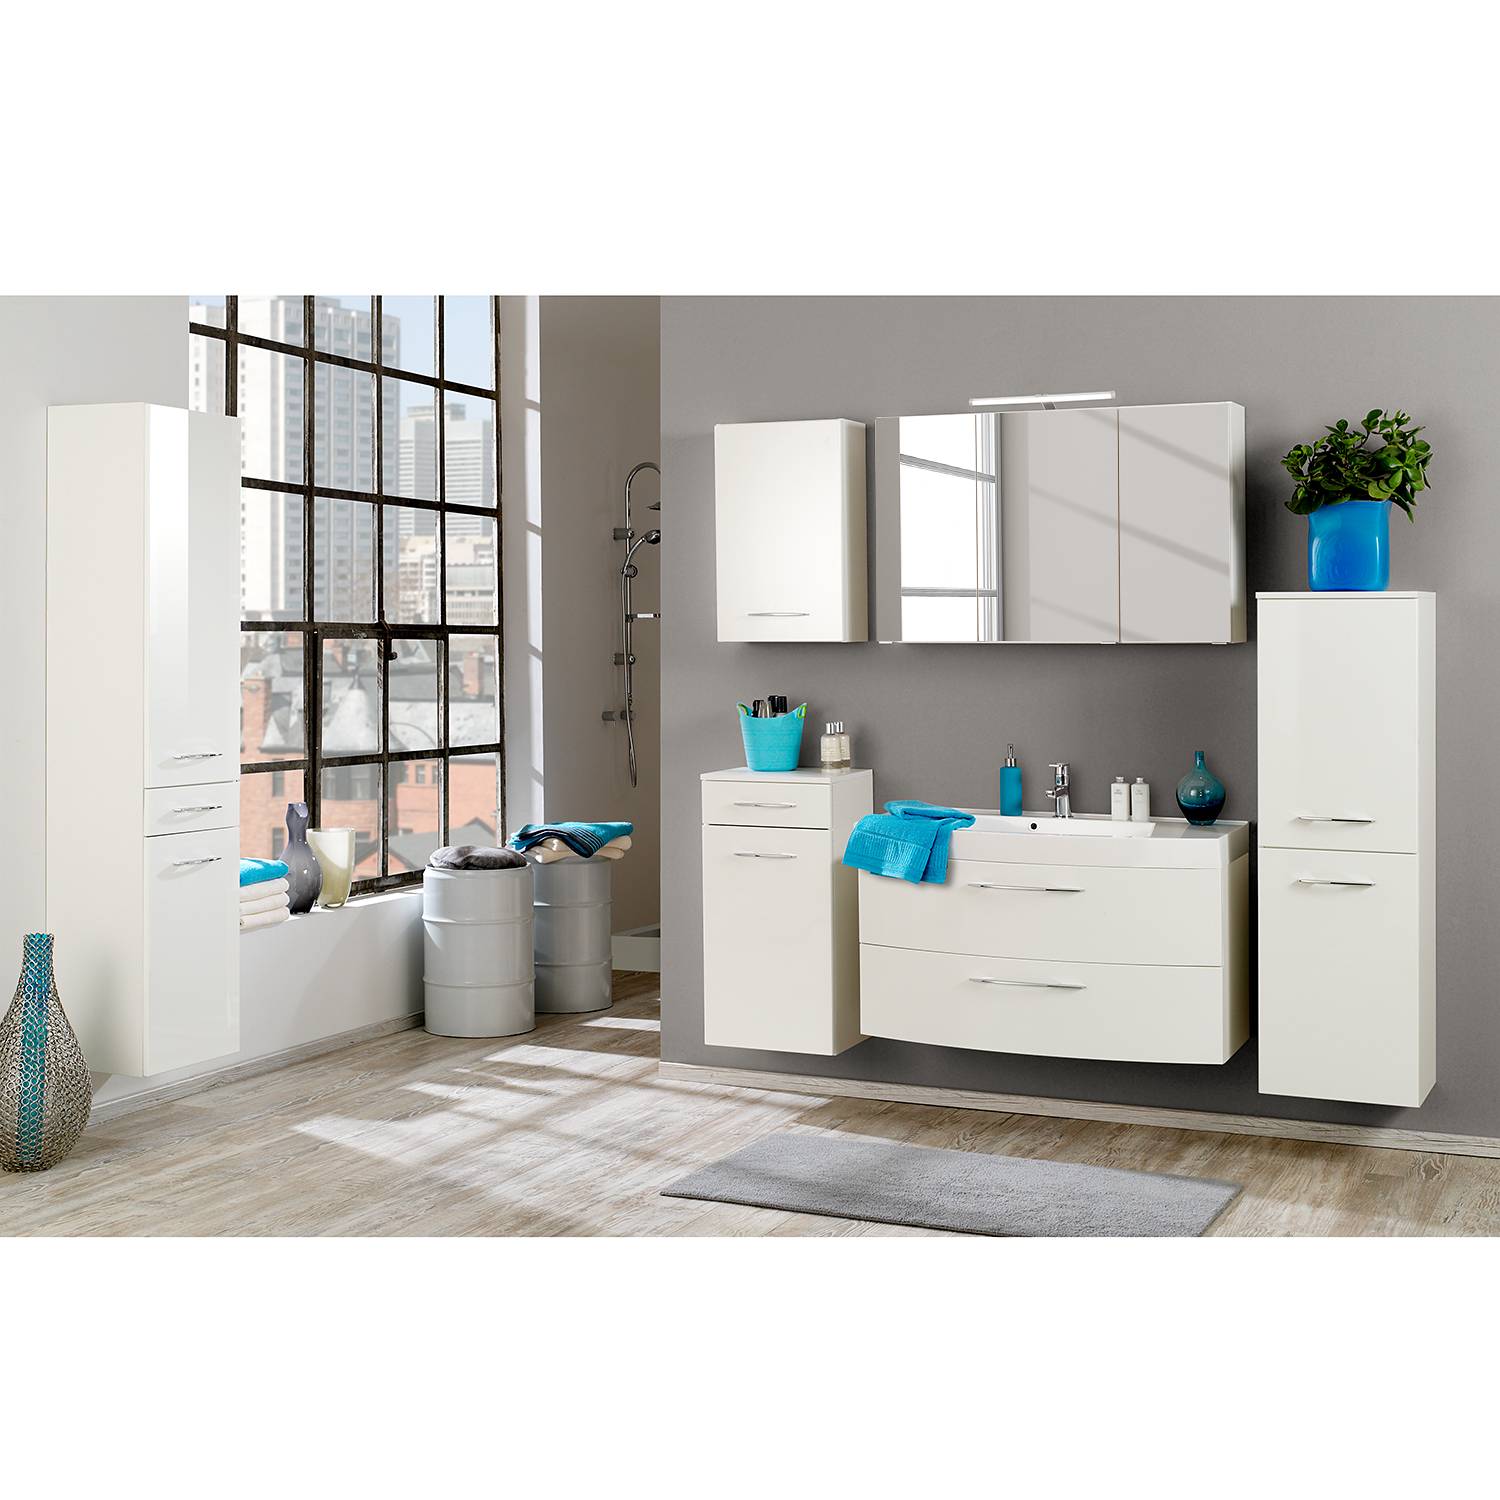 Image of Armoire basse Florida 000000001000047717